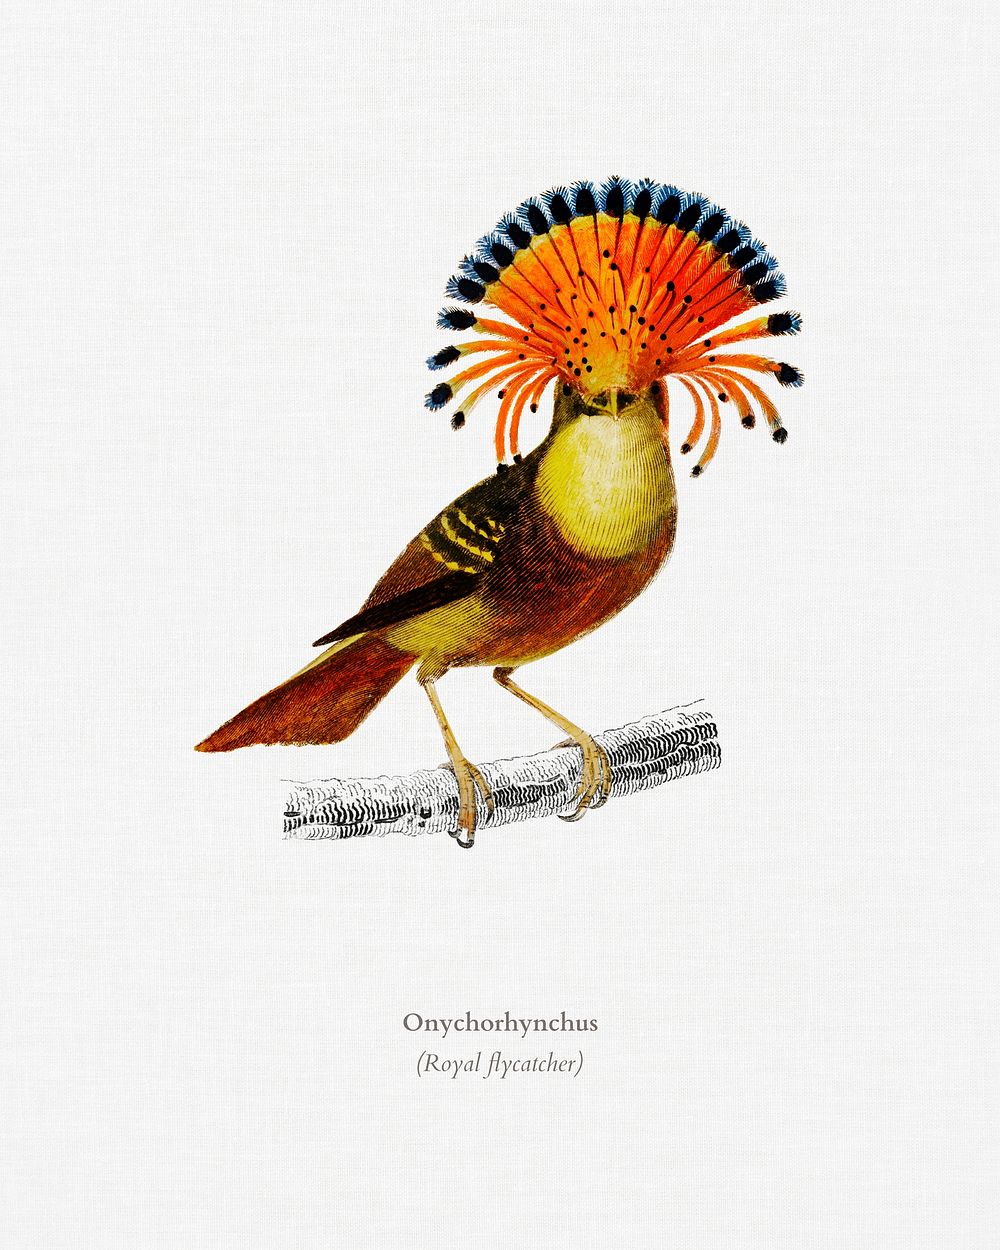 Royal flycatcher (Onychorhynchus) illustrated by Charles Dessalines D' Orbigny (1806-1876). Digitally enhanced from our own…